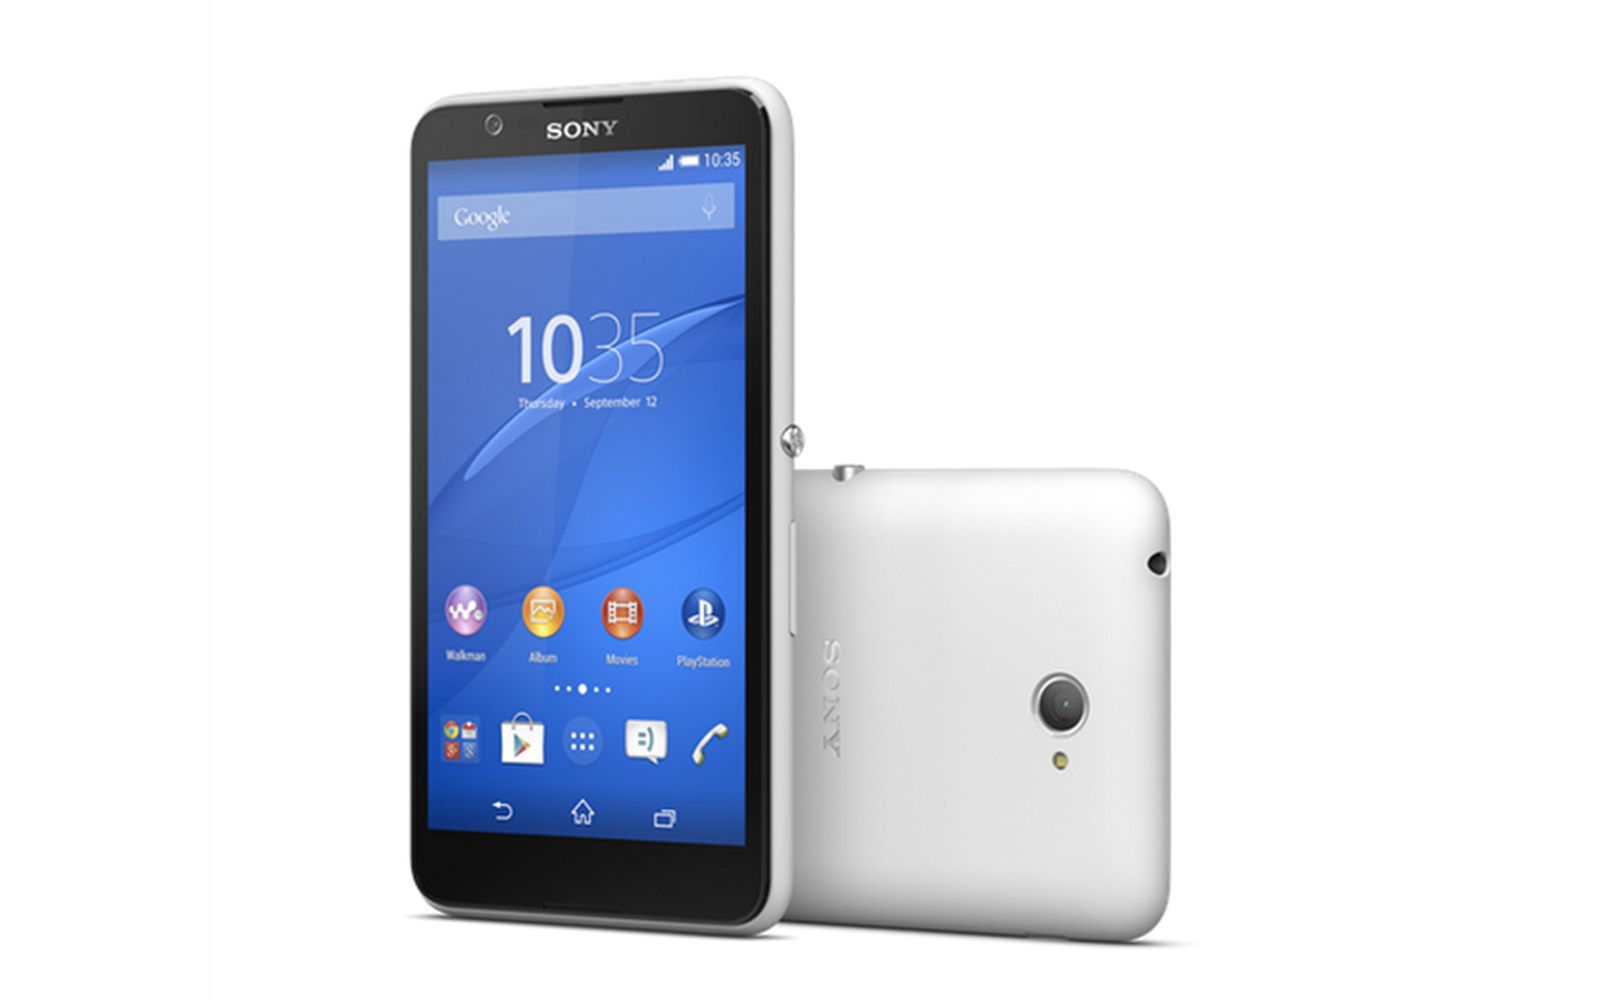 sony xperia e4 promises up to a week of battery with 5 inch display on a budget image 1